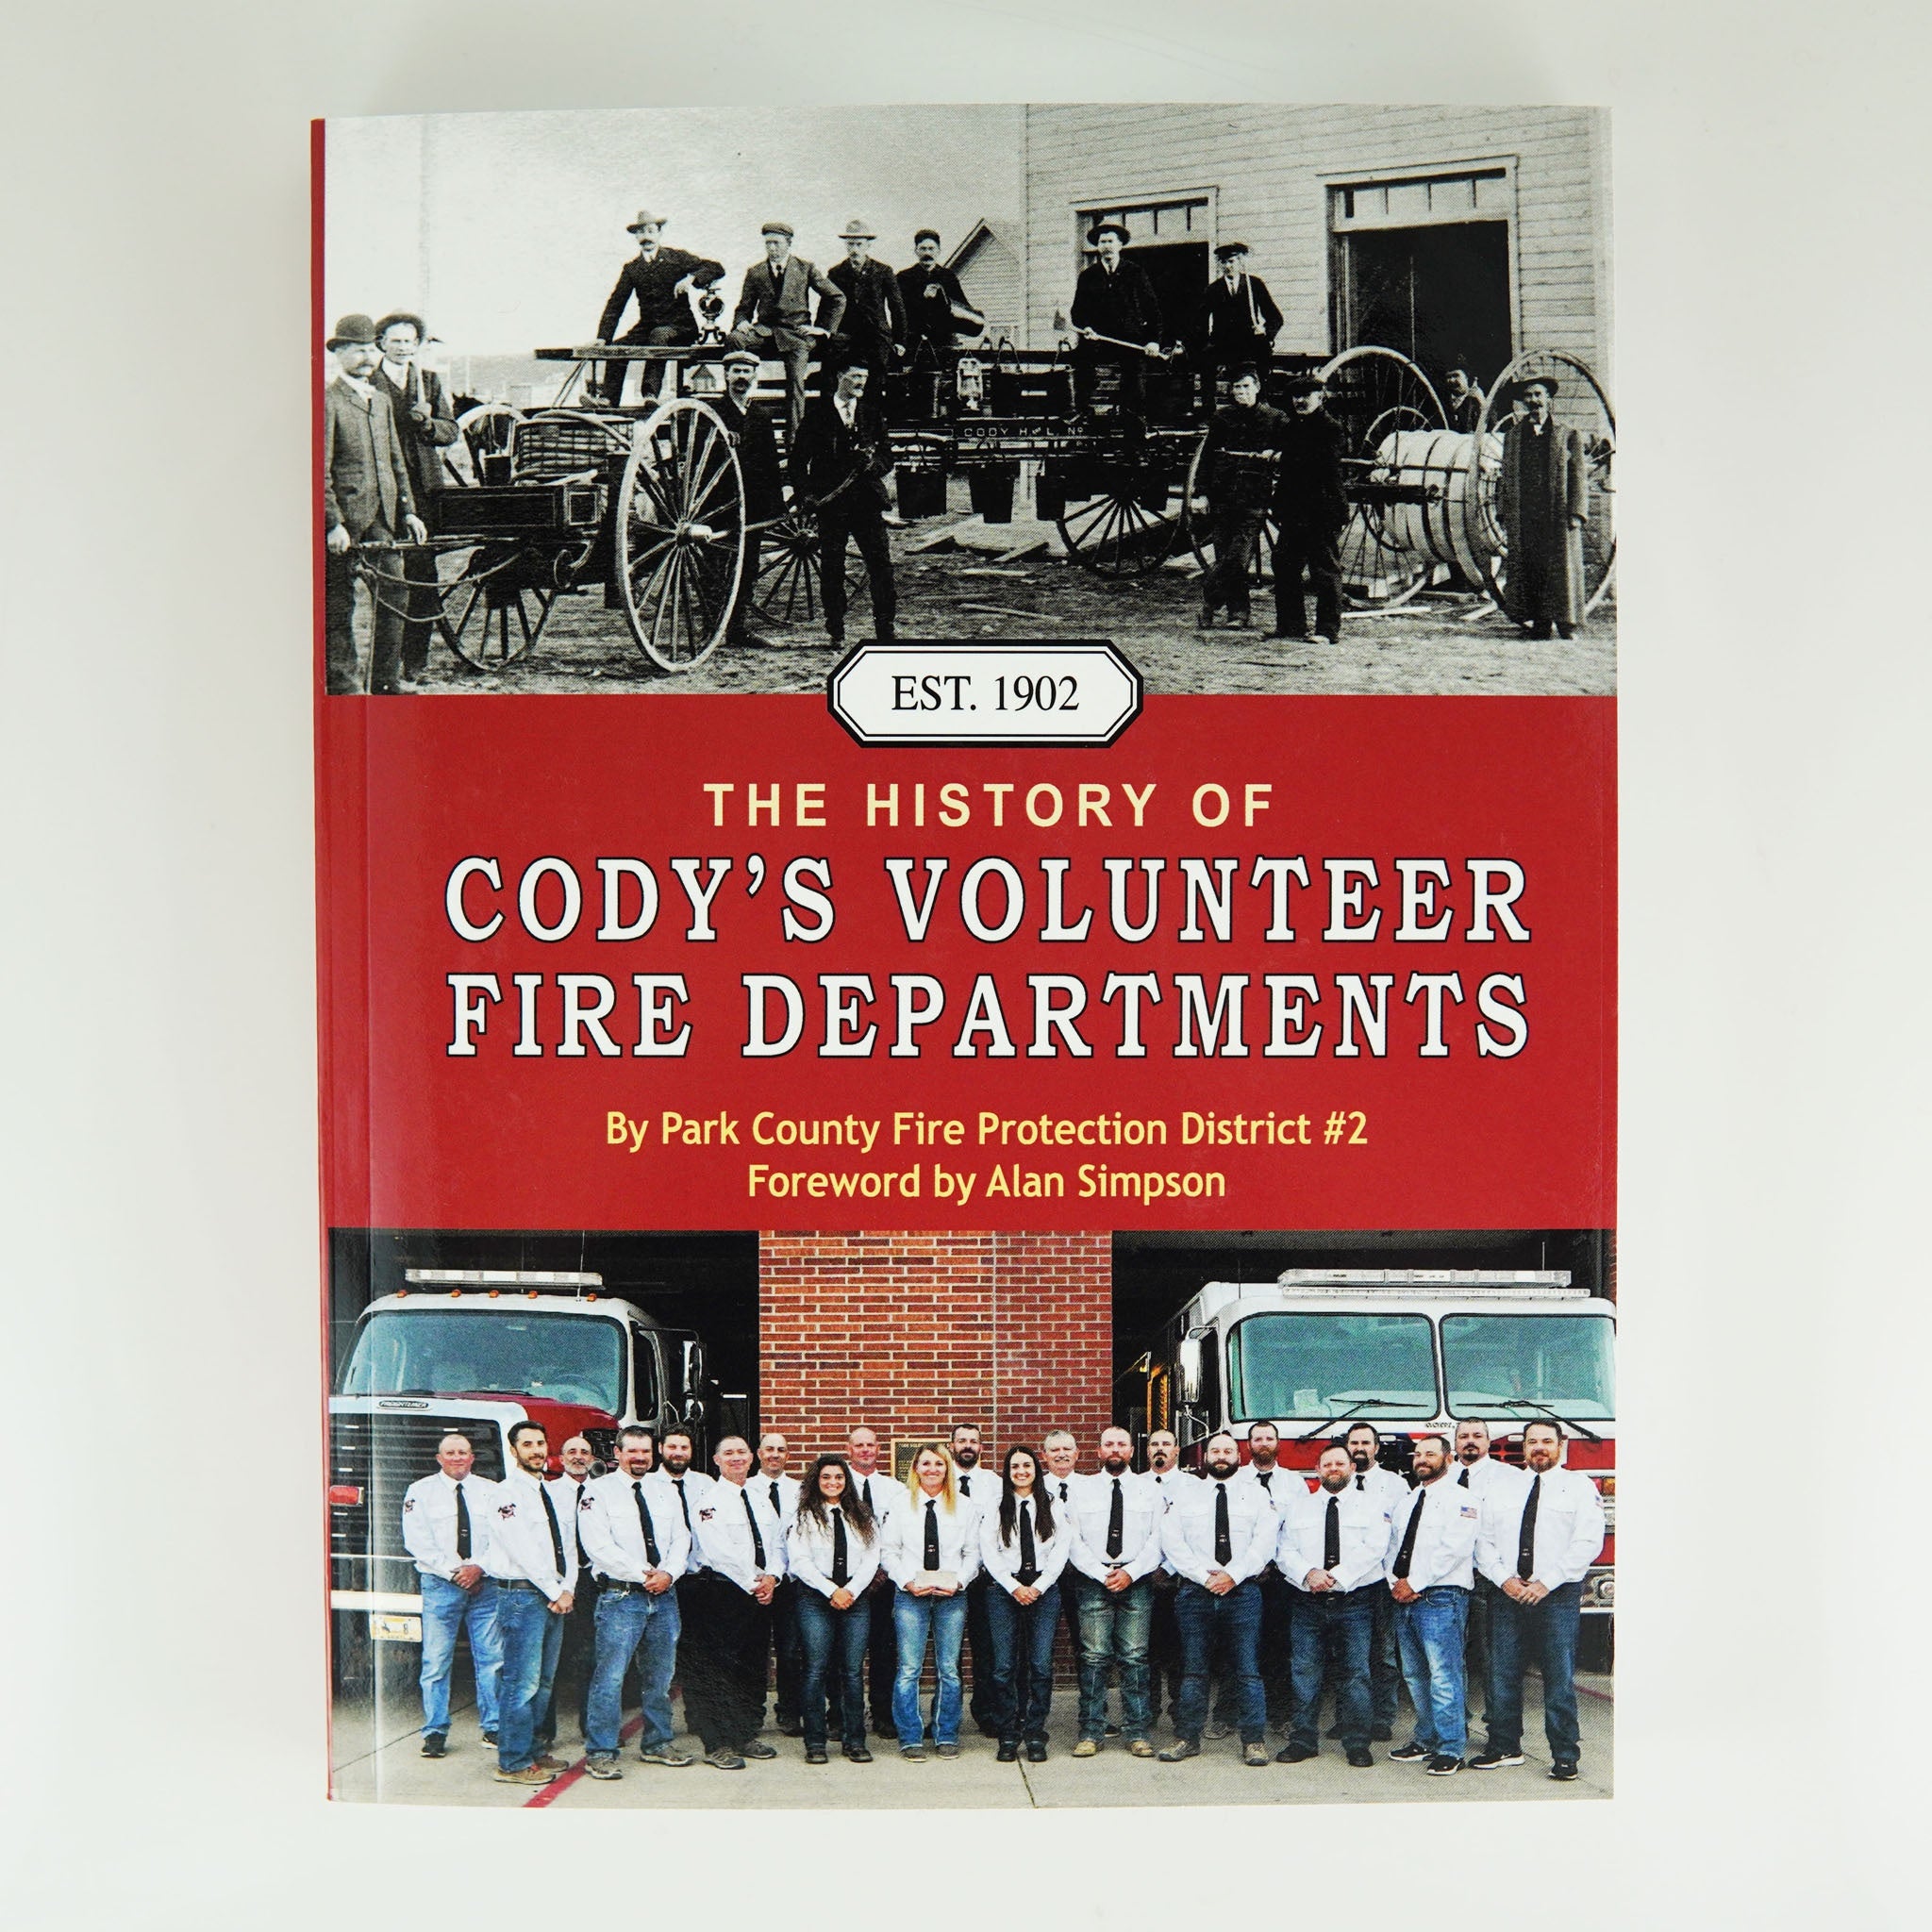 BK 9 THE HISTORY OF CODY'S VOLUNTEER FIRE DEPARTMENTS BY PARK COUNTY FIRE PROTECTION DISTRICT #2 SOFT COVER #16262